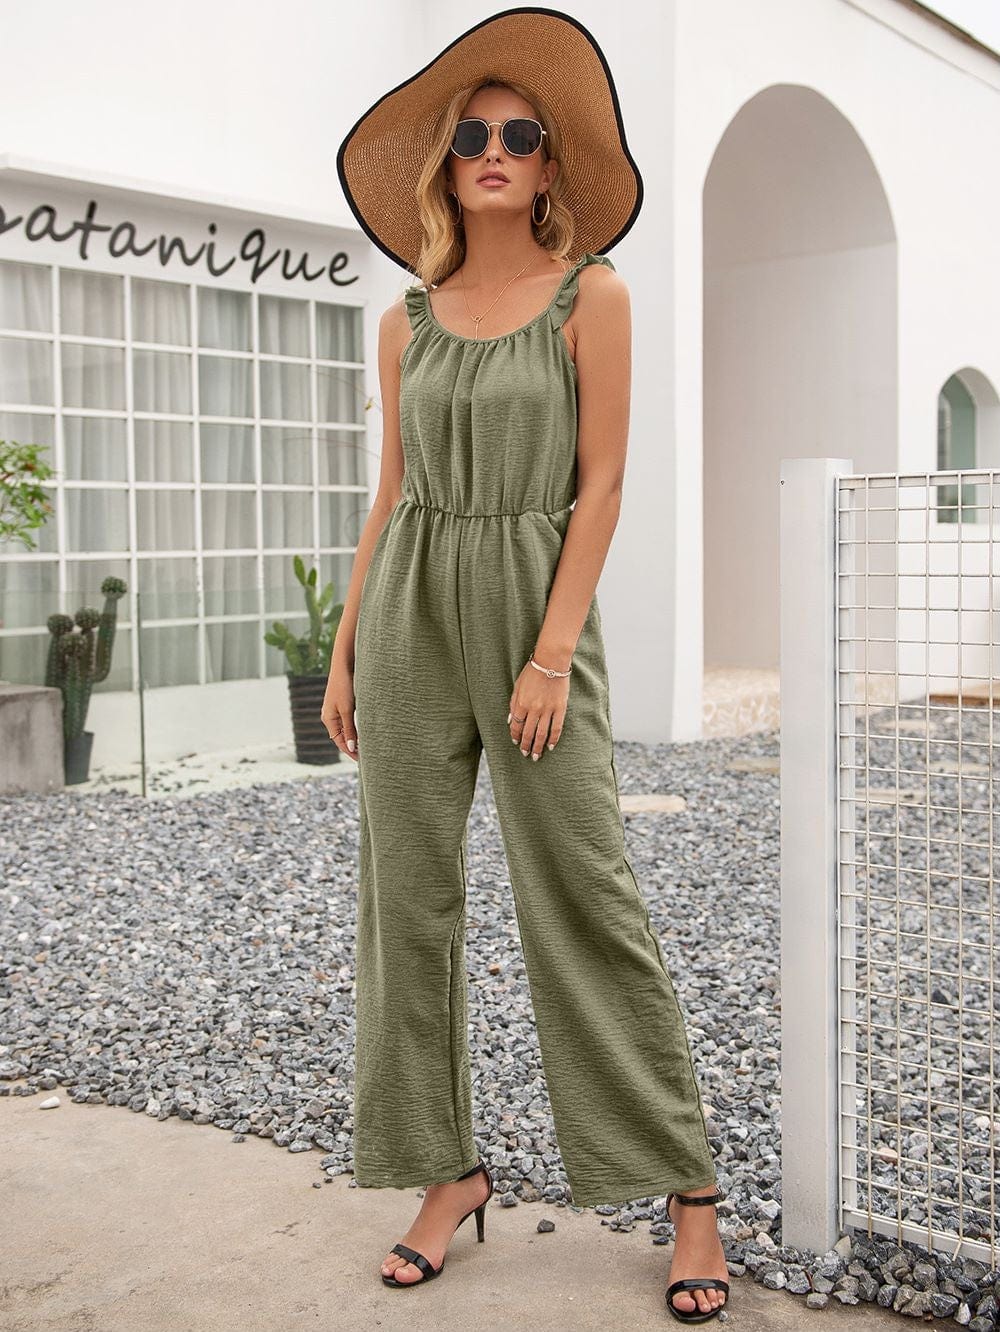 Solid Color Ruffle Strap Jumpsuit